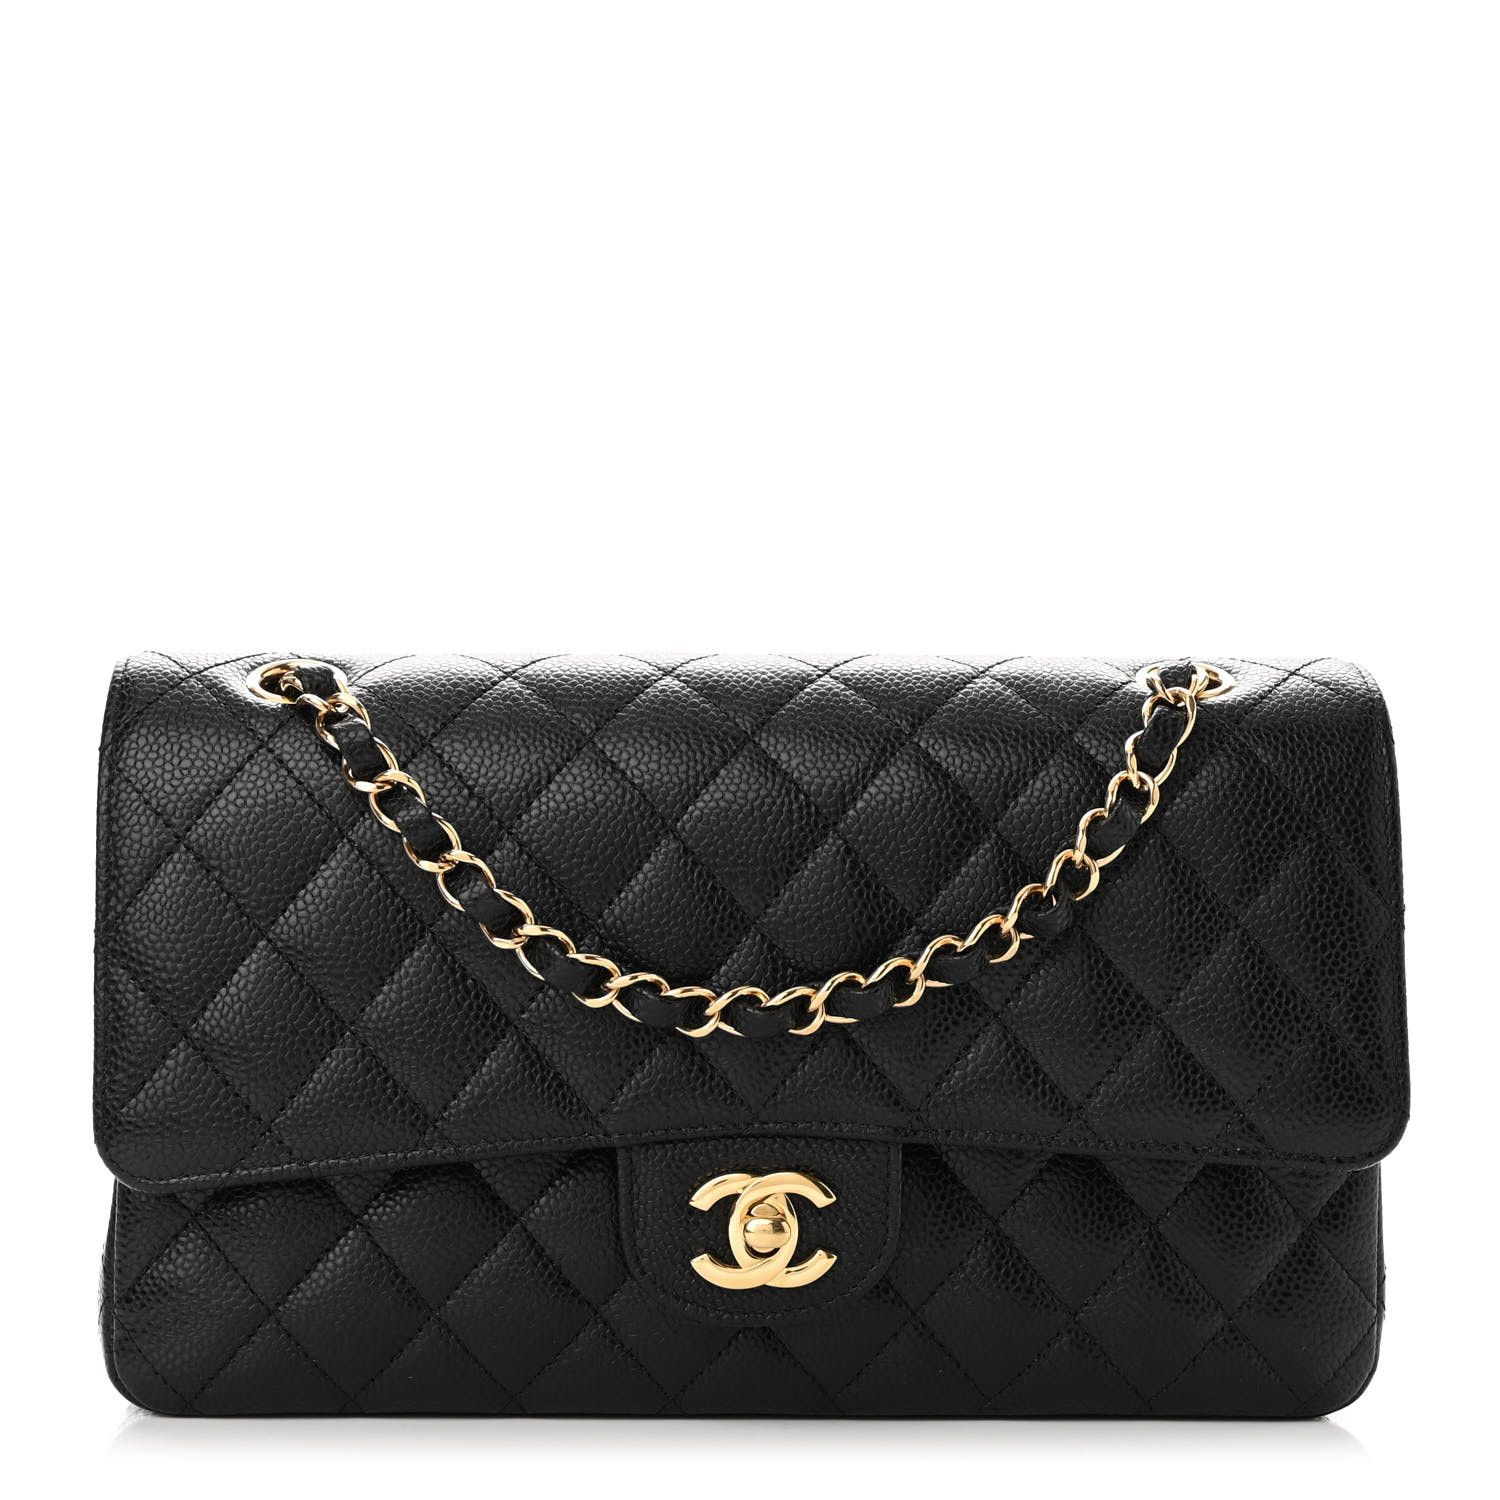 Caviar Quilted Medium Double Flap Black | FASHIONPHILE (US)